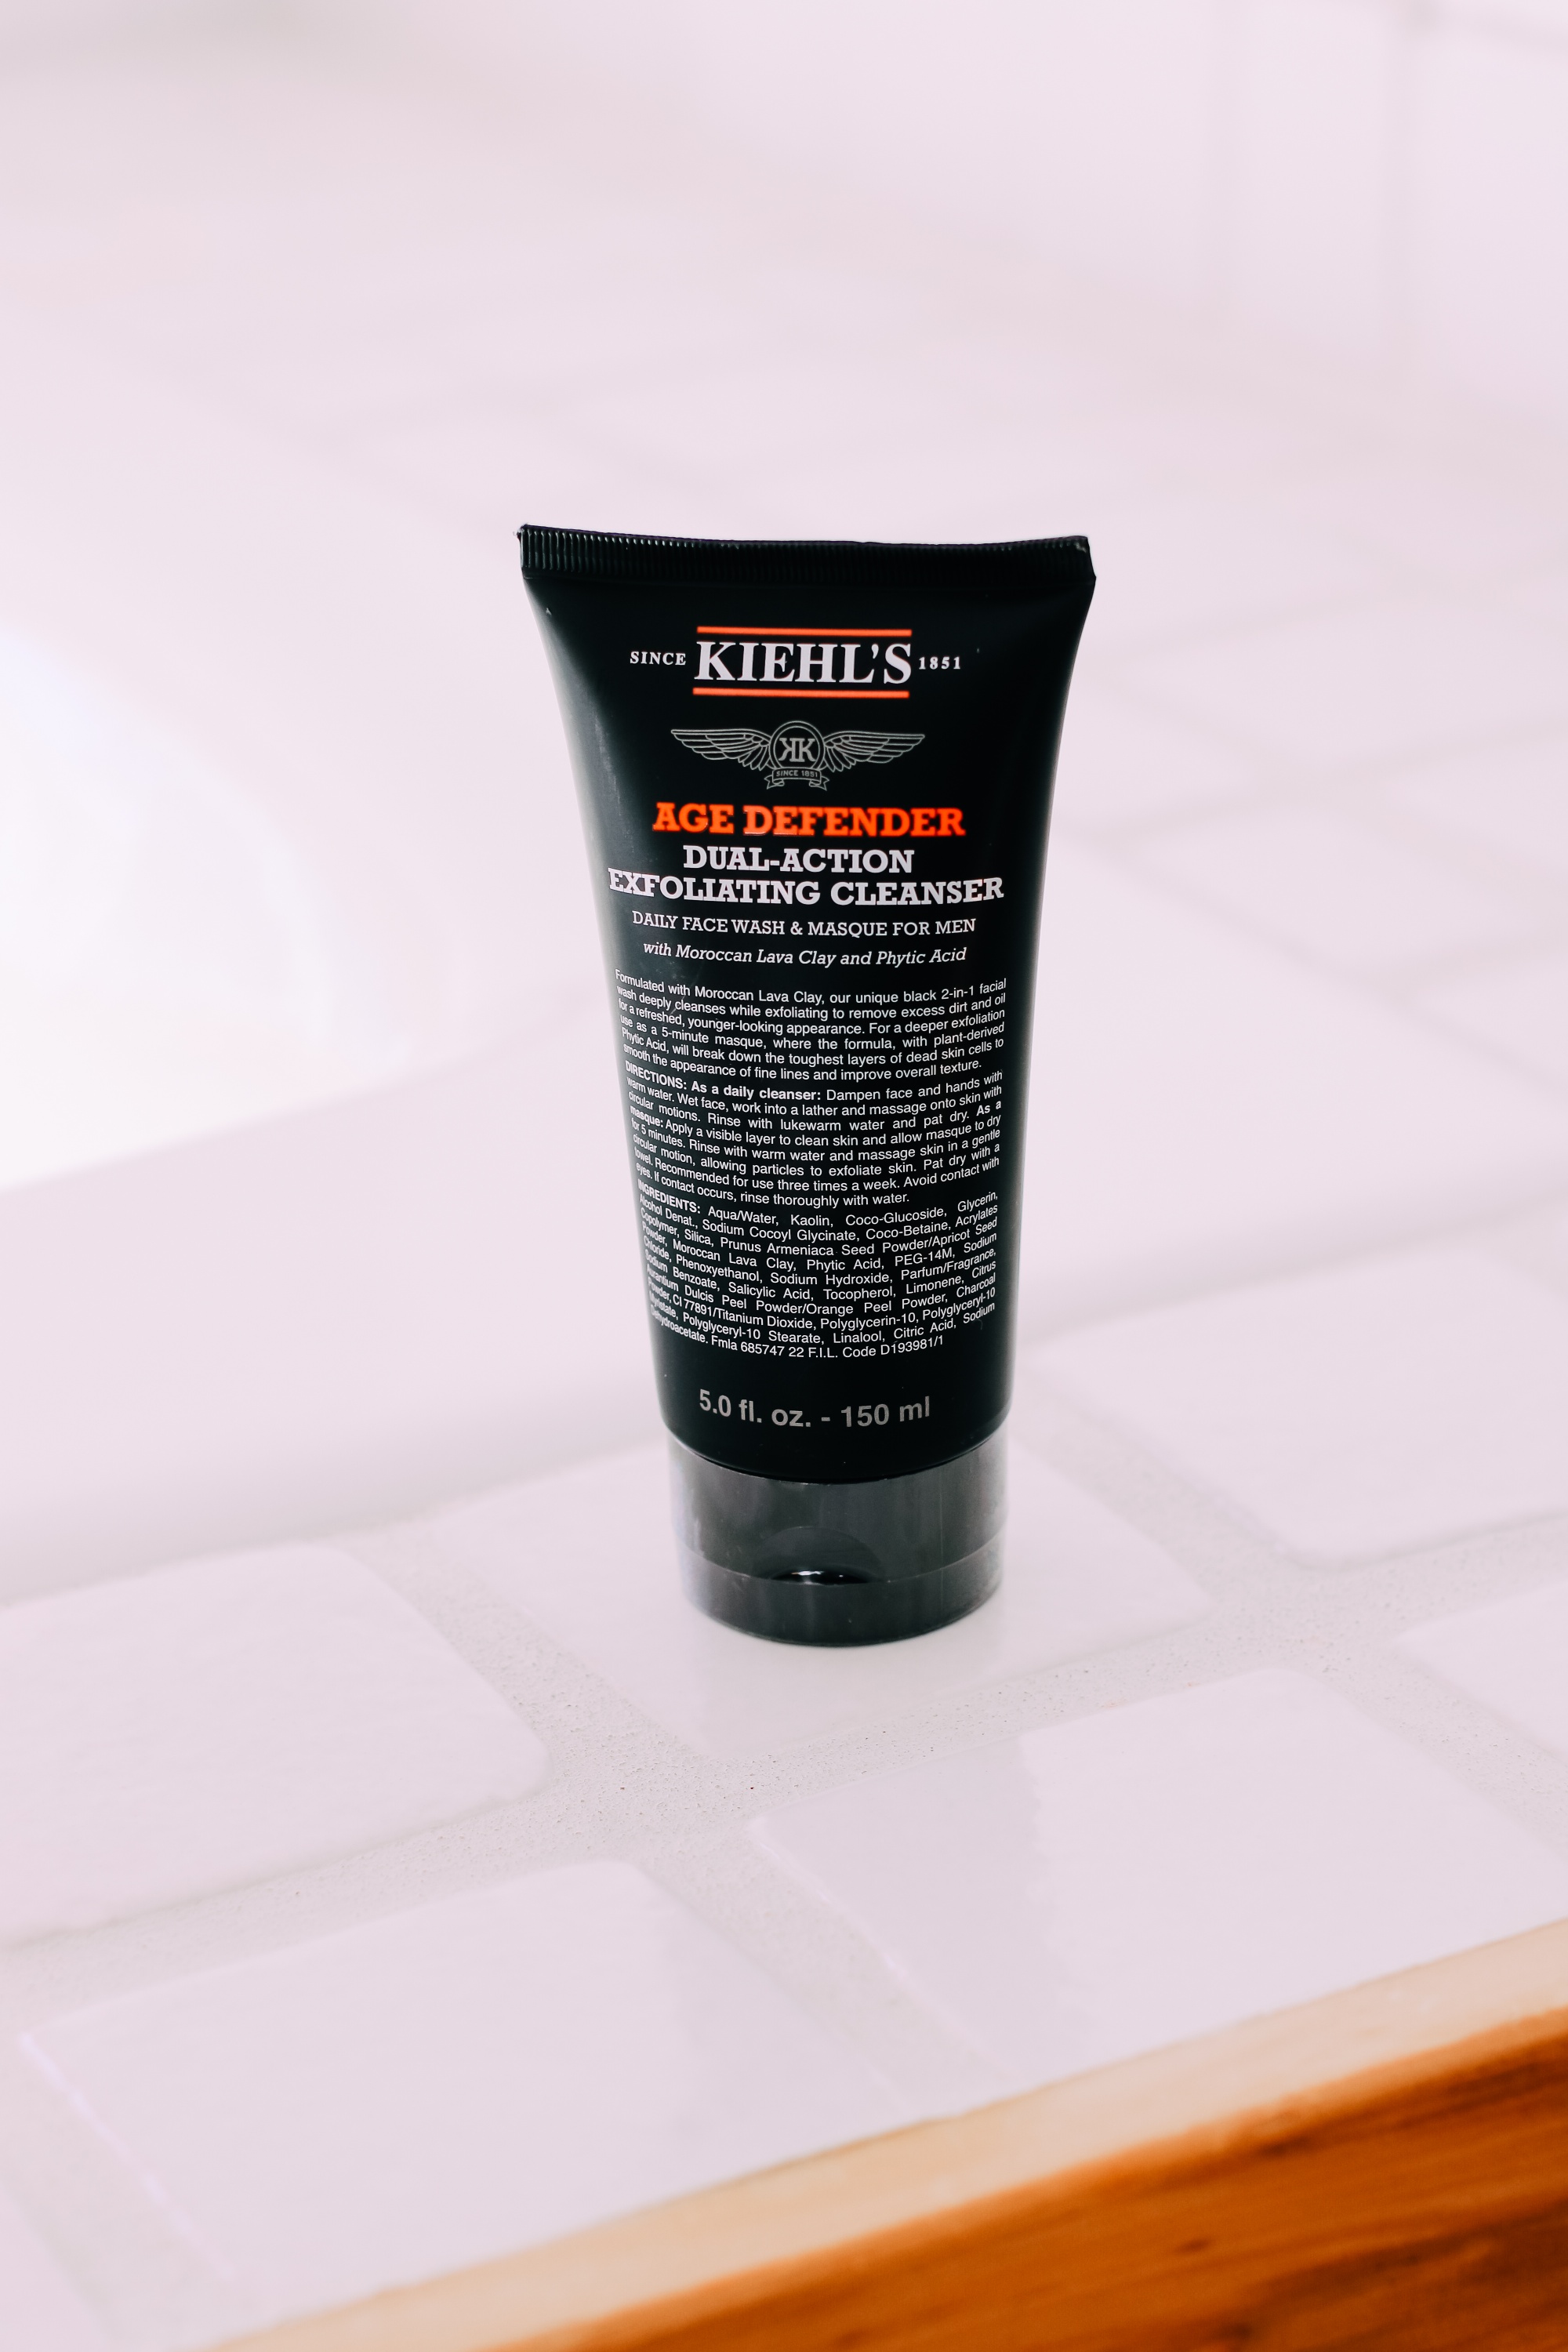 Skincare Gifts, Erin Busbee of Busbee Style sharing skincare for men including the Age Defender Duel Action Exfoliating Cleanser by Kiehl's